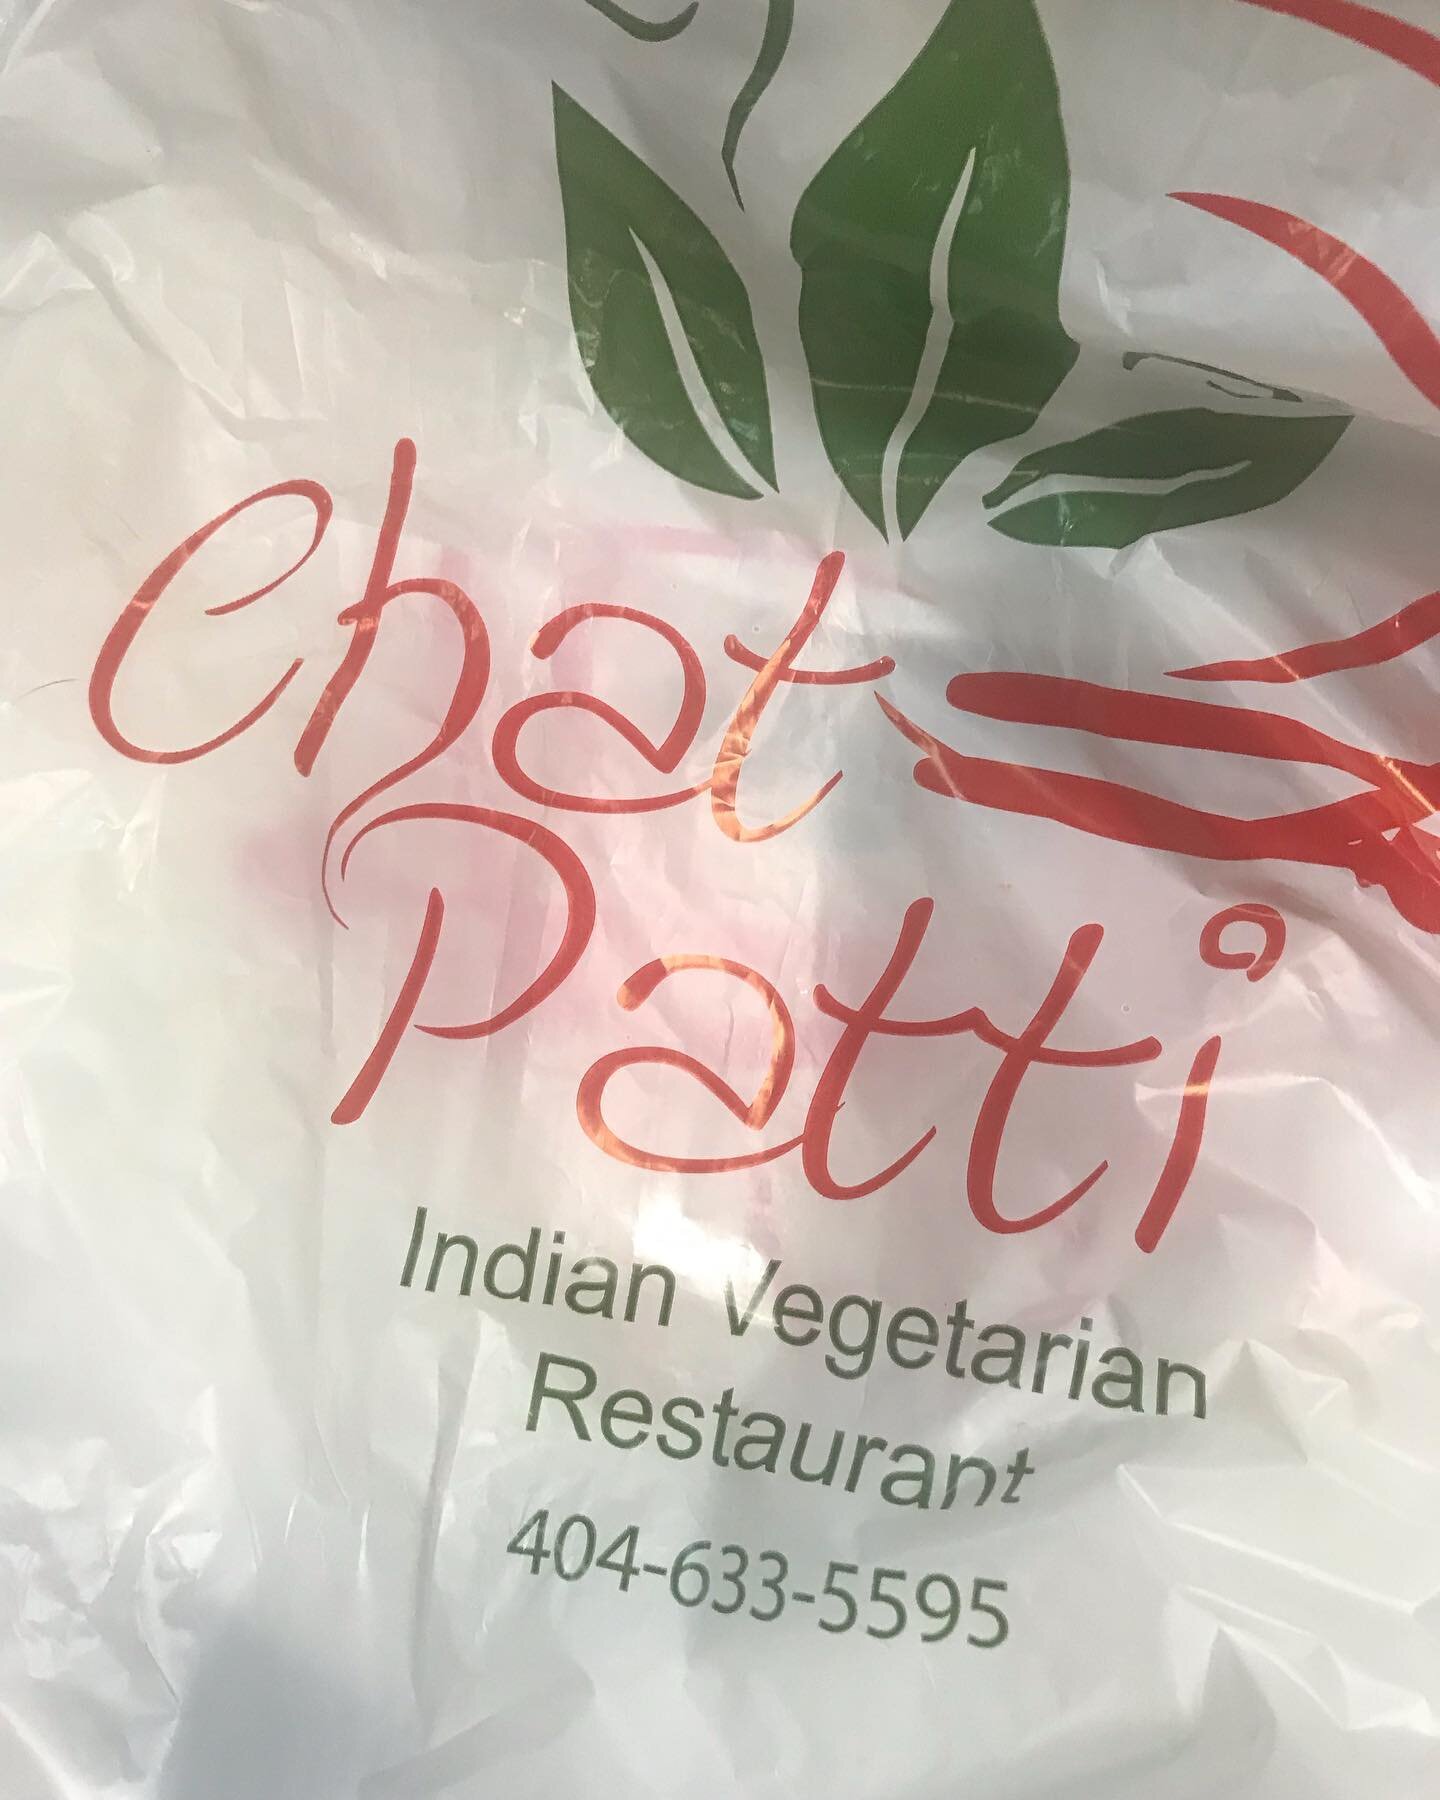 Been giving Buford highway a little bit of a break and have been heading to Patel Plaza lately. Today&rsquo;s lunch at Chat Patti Indian vegetarian restaurant was super delicious. The lunch platter was fantastic, it&rsquo;s full of flavors, textures 